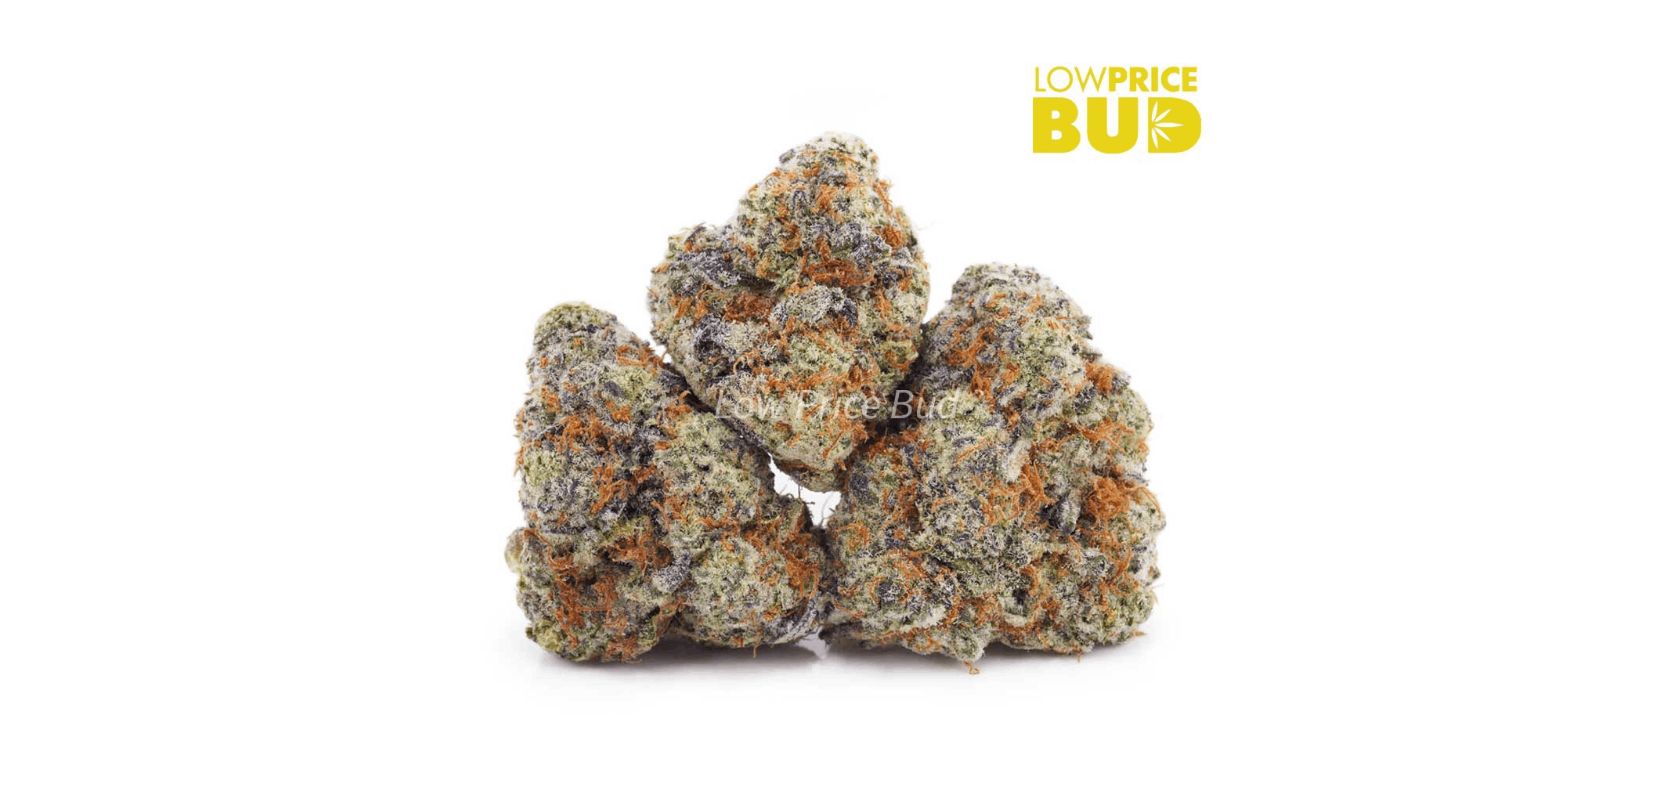 The Dragon's Breath (AAAA) is a potent and popular Sativa dominant strain that's beloved by many weed enthusiasts, especially people looking to alleviate symptoms of depression. 